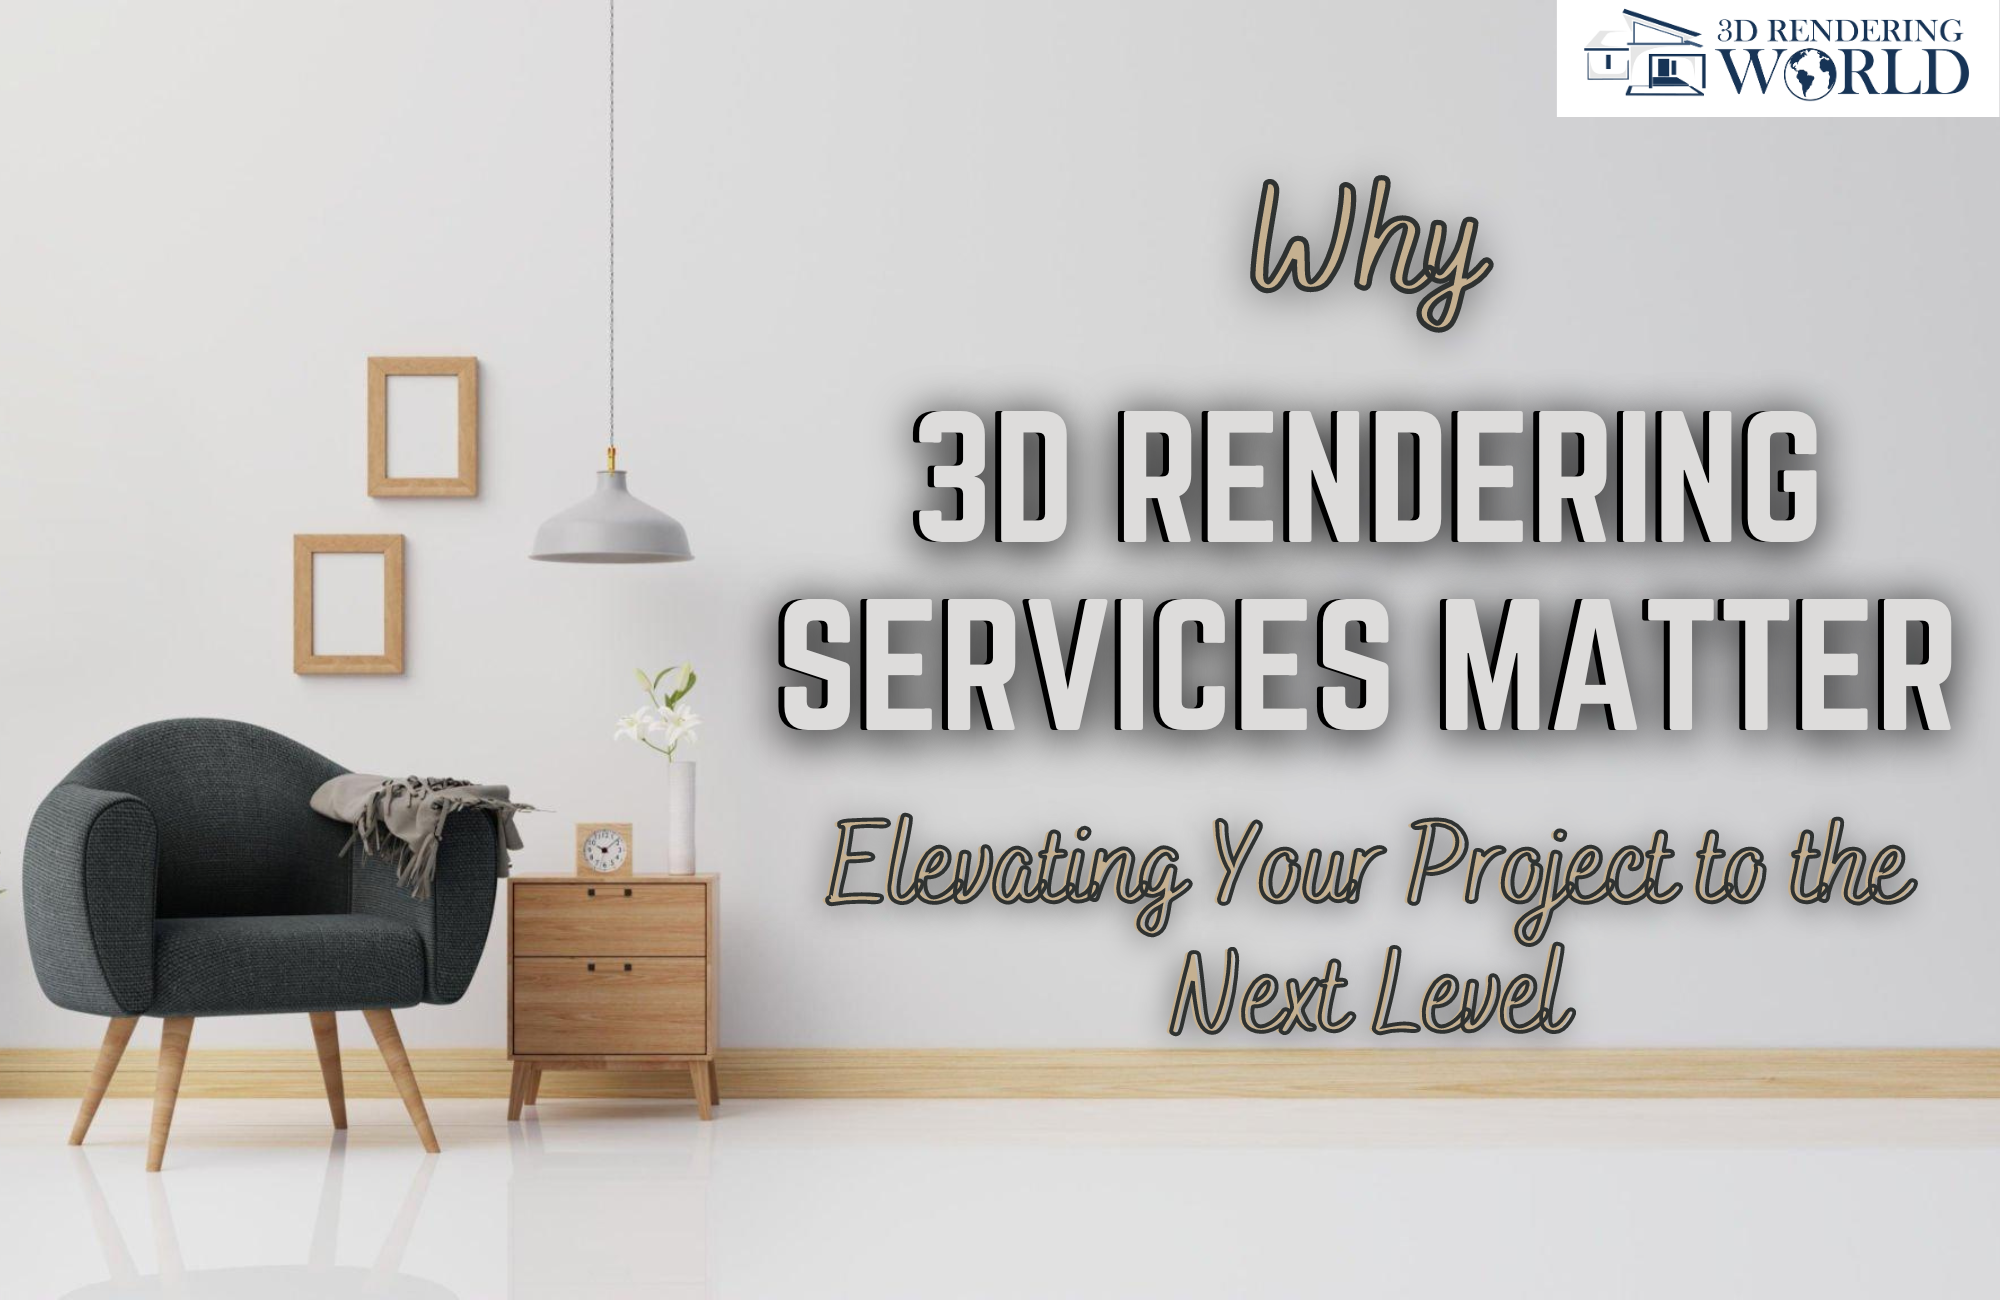 Why Hiring a Native English Speaking 3D Rendering Expert Matters